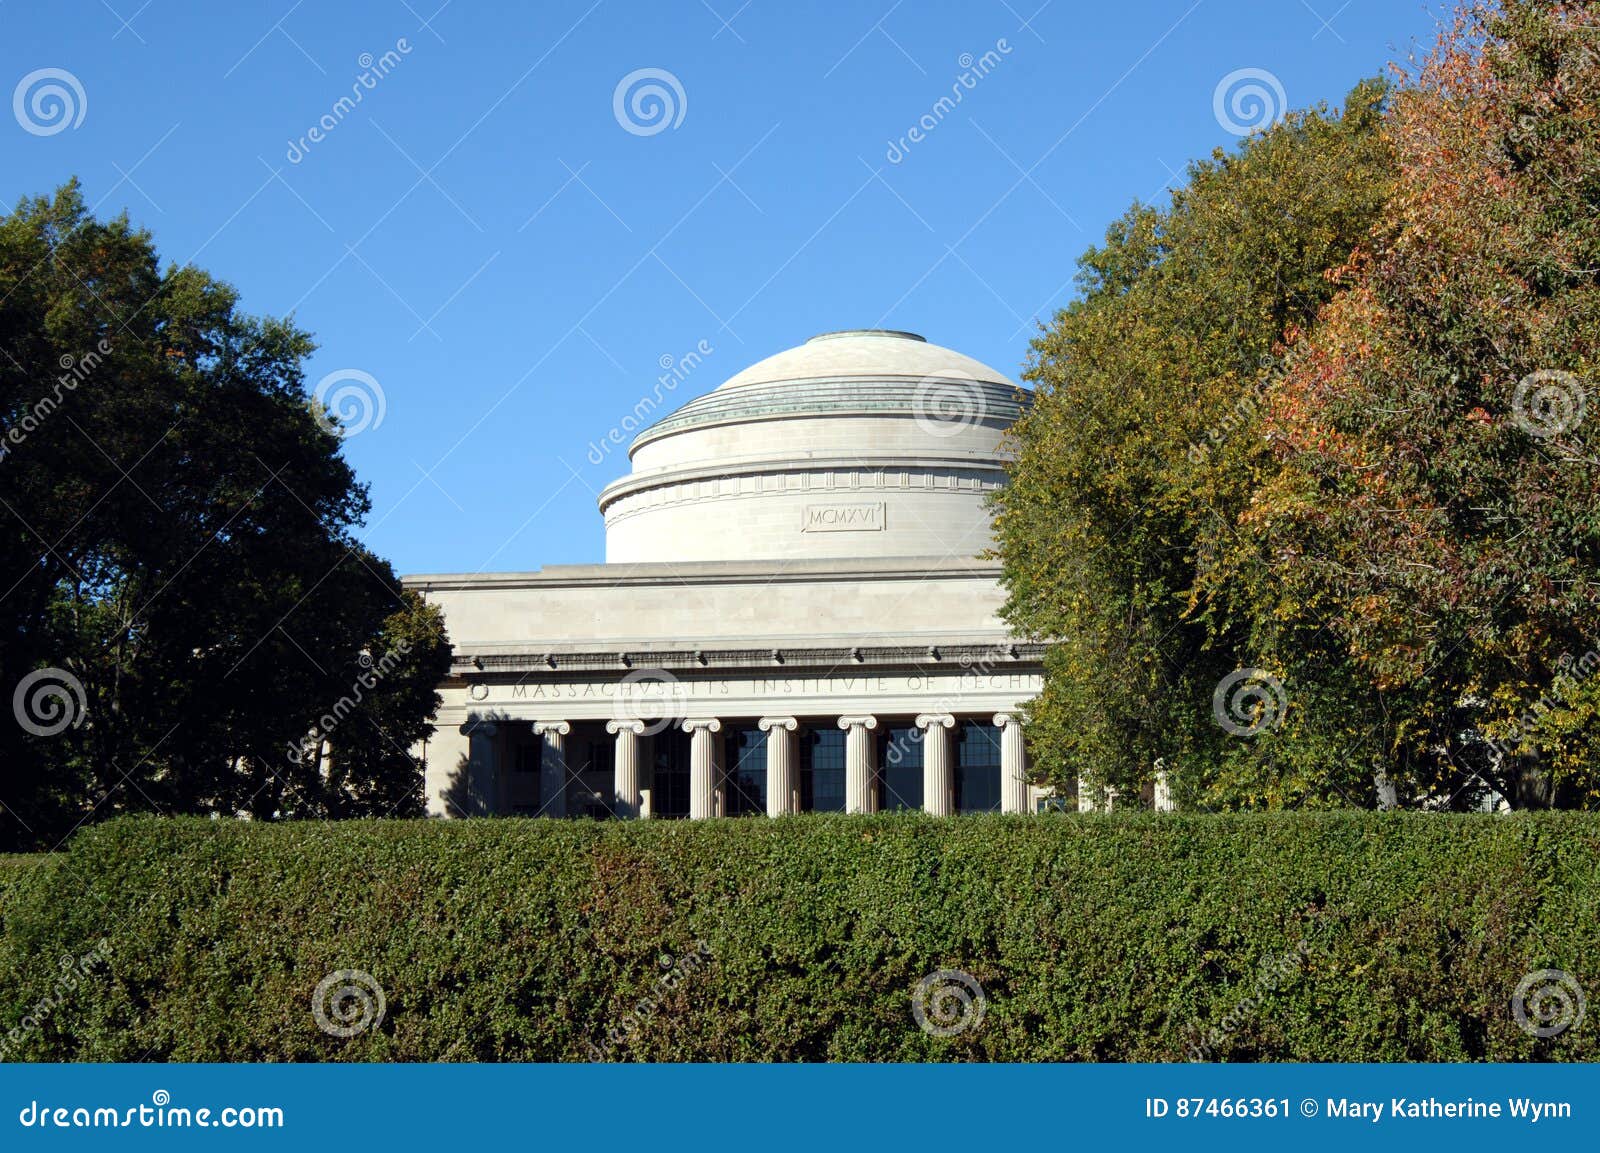 great dome of mit in boston